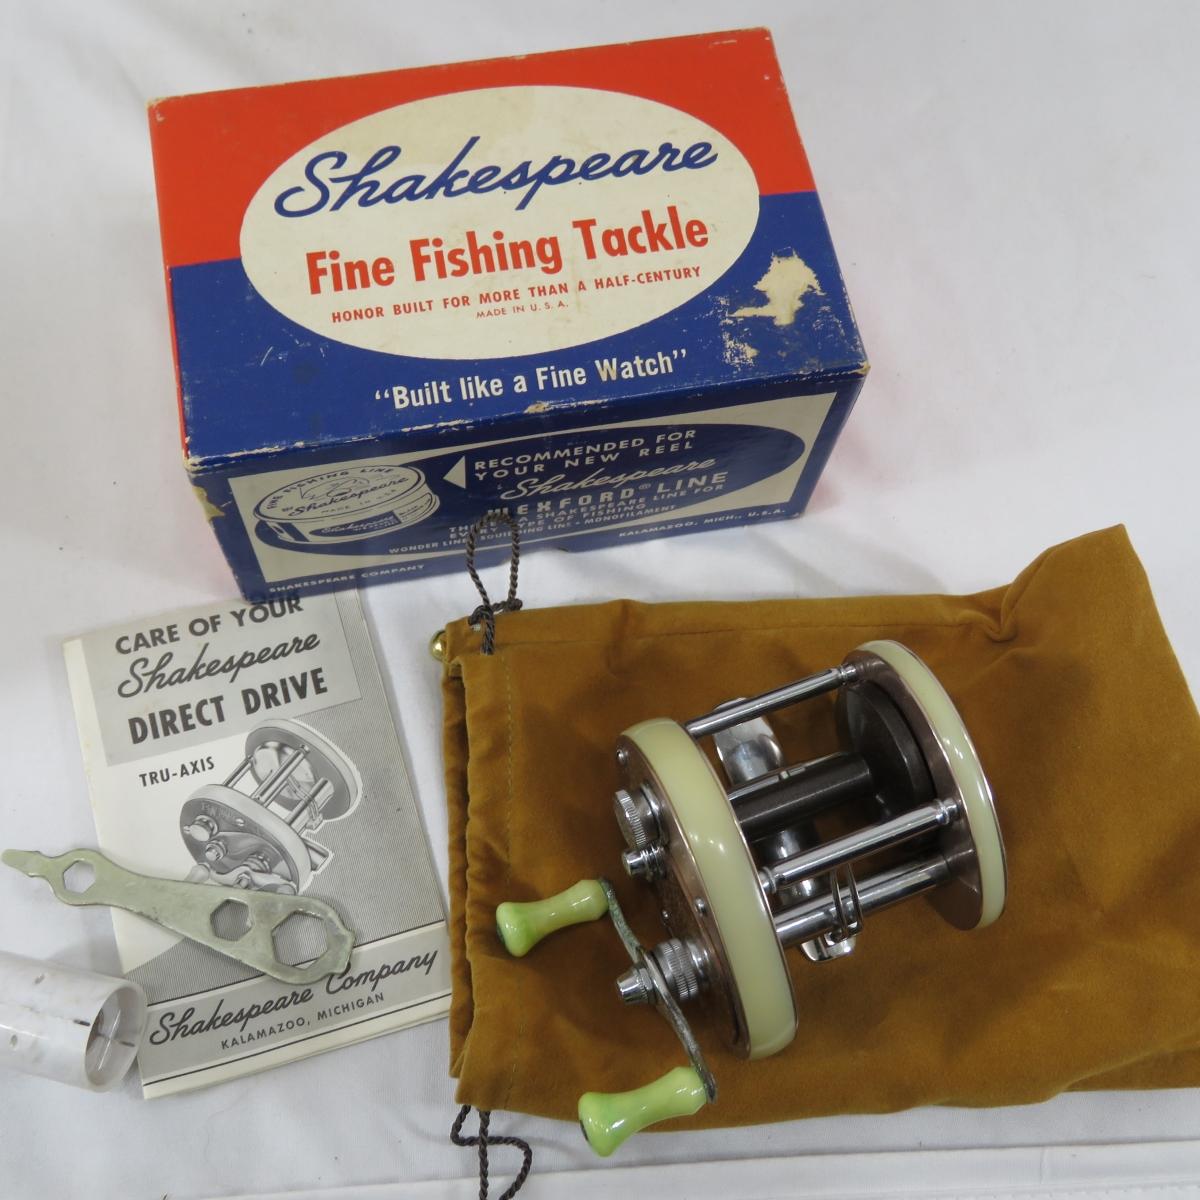 Shakespeare and other fishing reels and more